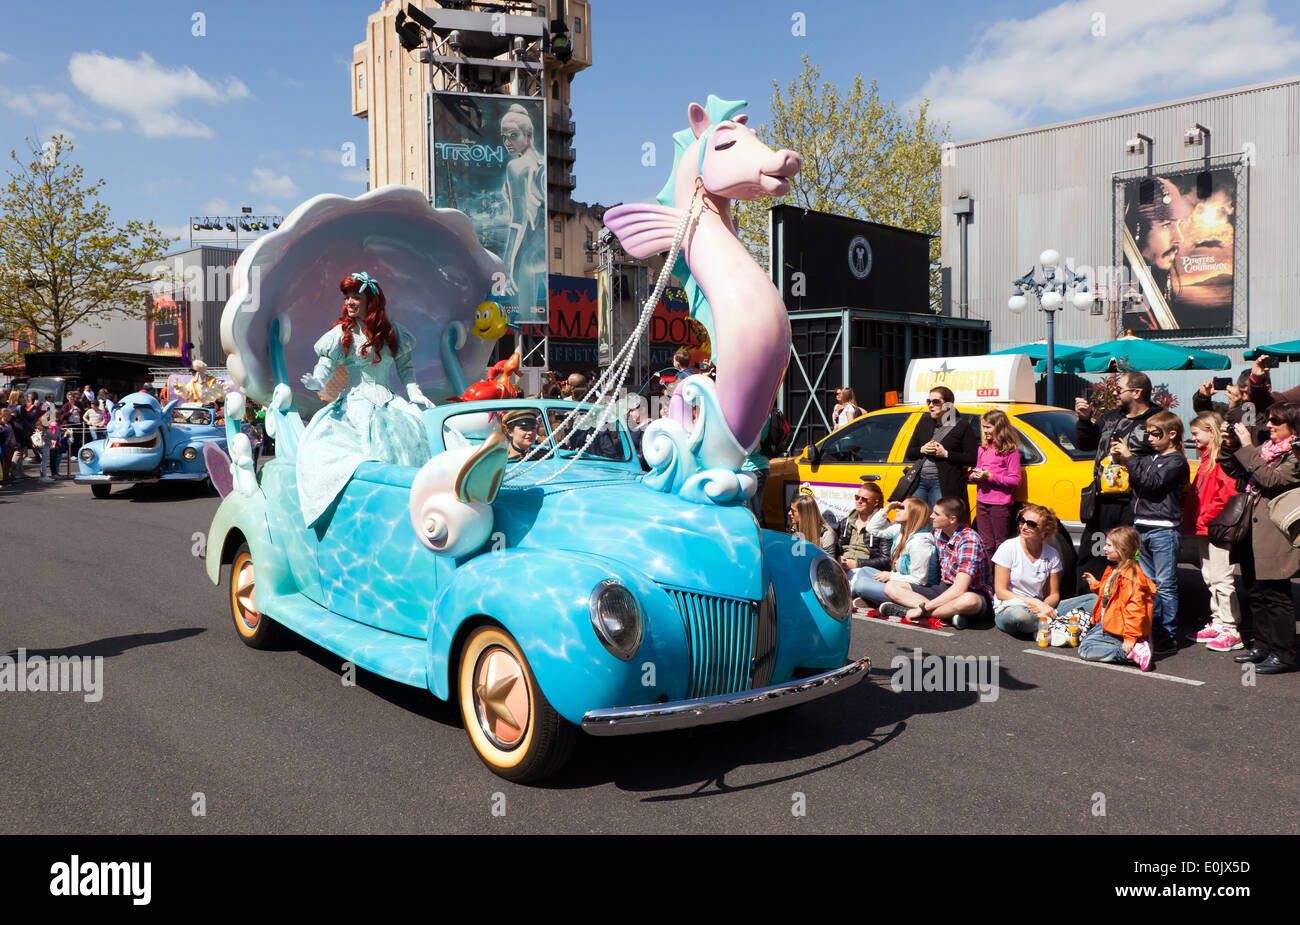 A  image of Ariel, from the Little Mermaid film, taking part  in the Stars 'n' Cars, Parade, Walt Disney Studios, Paris. Stock Photo